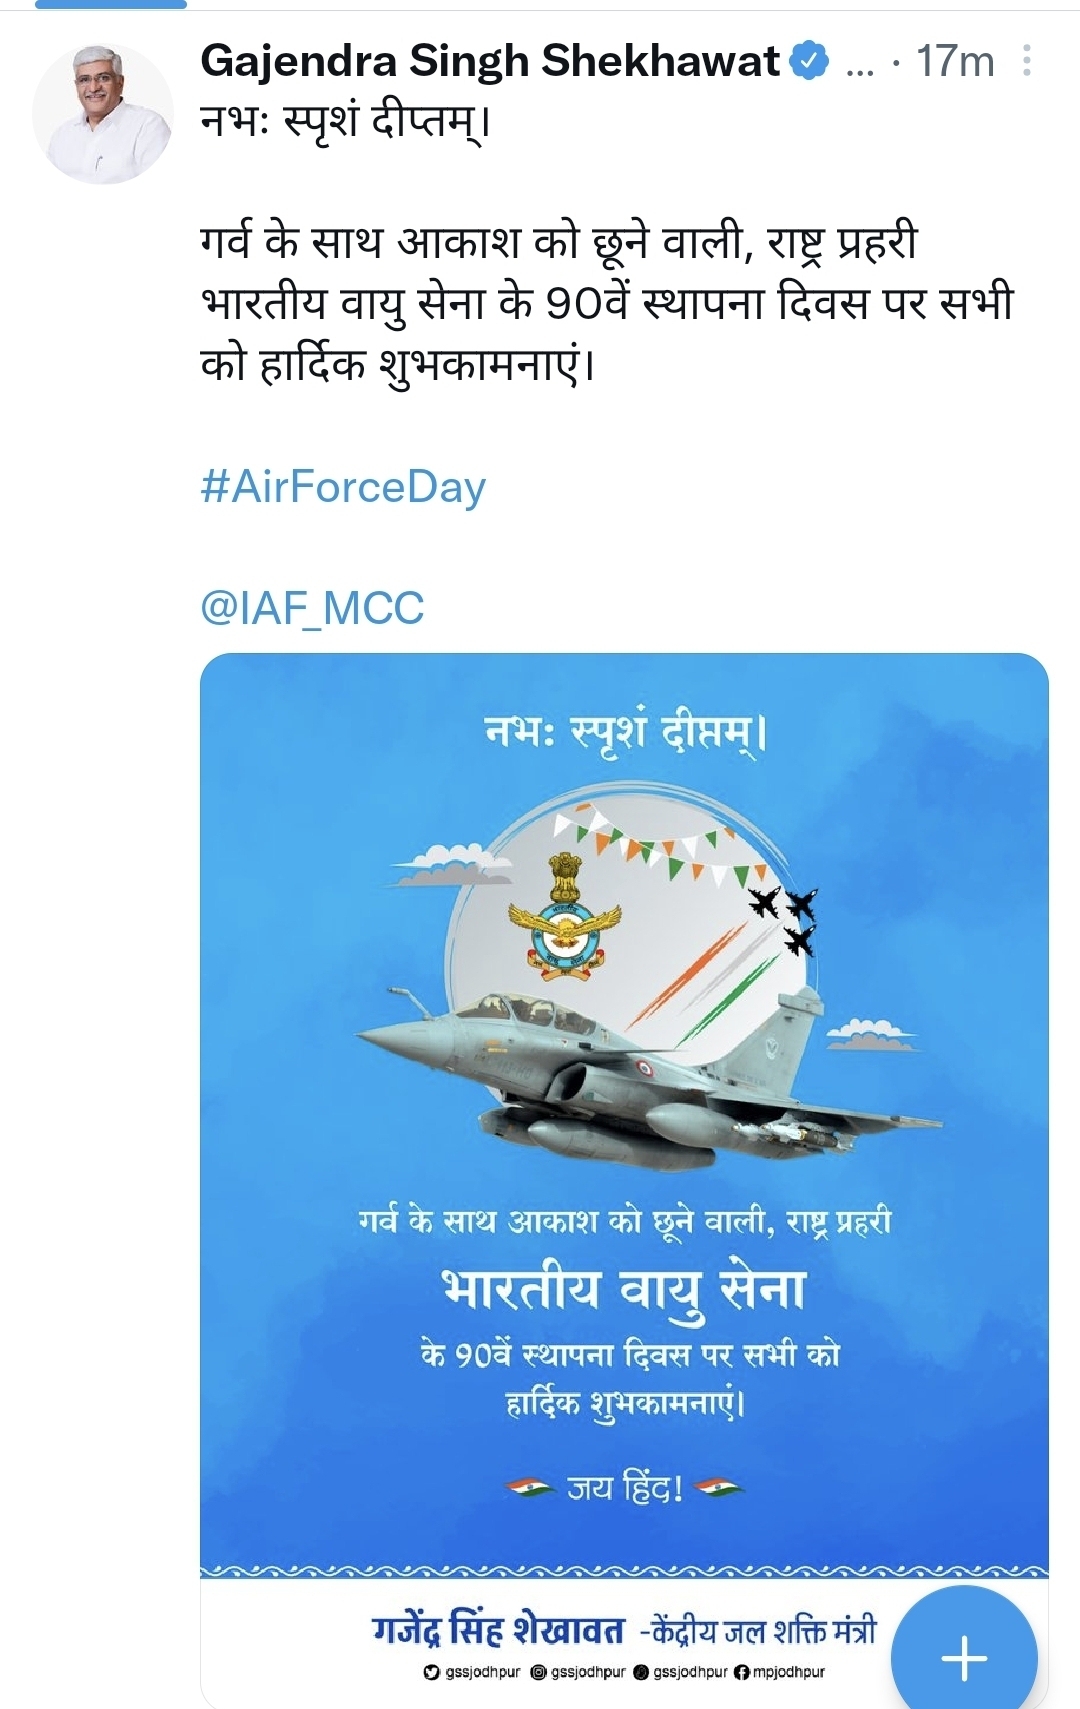 iaf-day-2022-gajendra-singh-shekhawat-trolled-on-twitter-after-users-spot-paf-f16-in-congratulatory-message